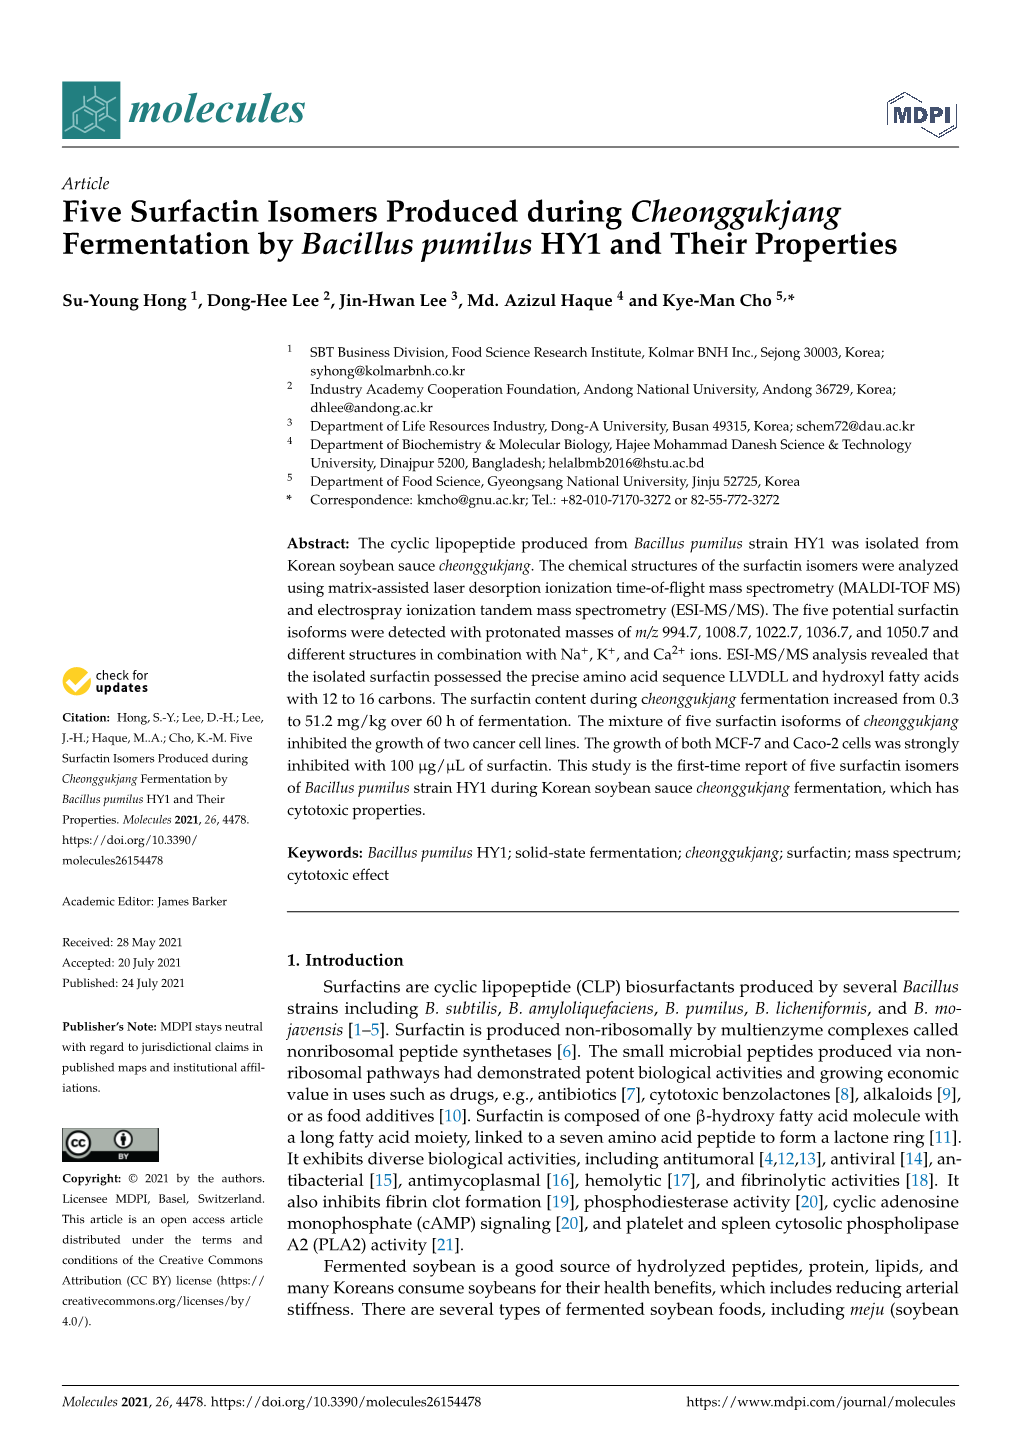 Five Surfactin Isomers Produced During Cheonggukjang Fermentation by Bacillus Pumilus HY1 and Their Properties